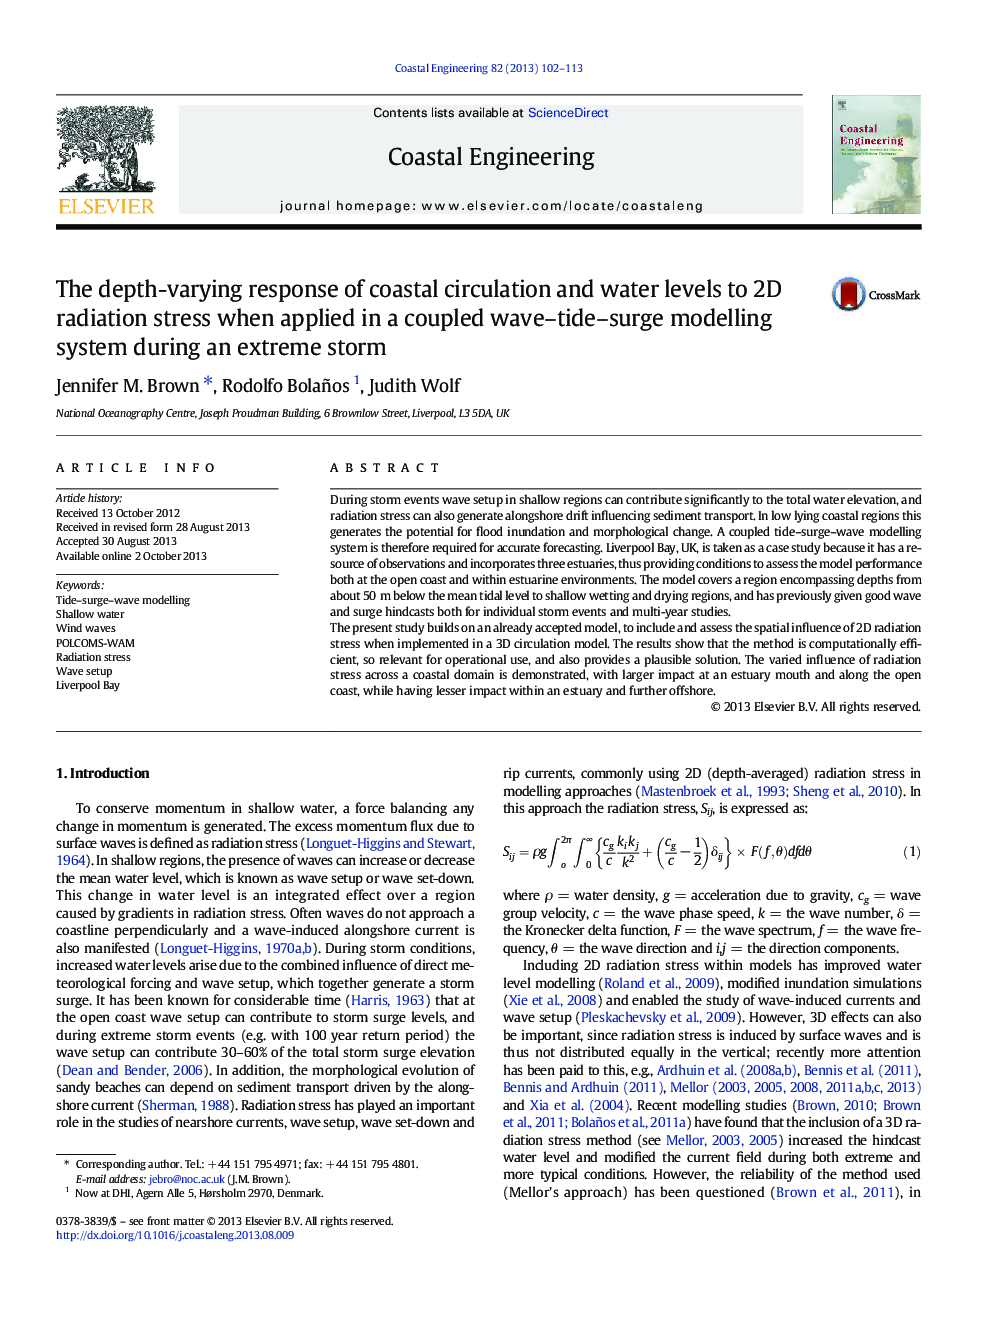 The depth-varying response of coastal circulation and water levels to 2D radiation stress when applied in a coupled wave–tide–surge modelling system during an extreme storm